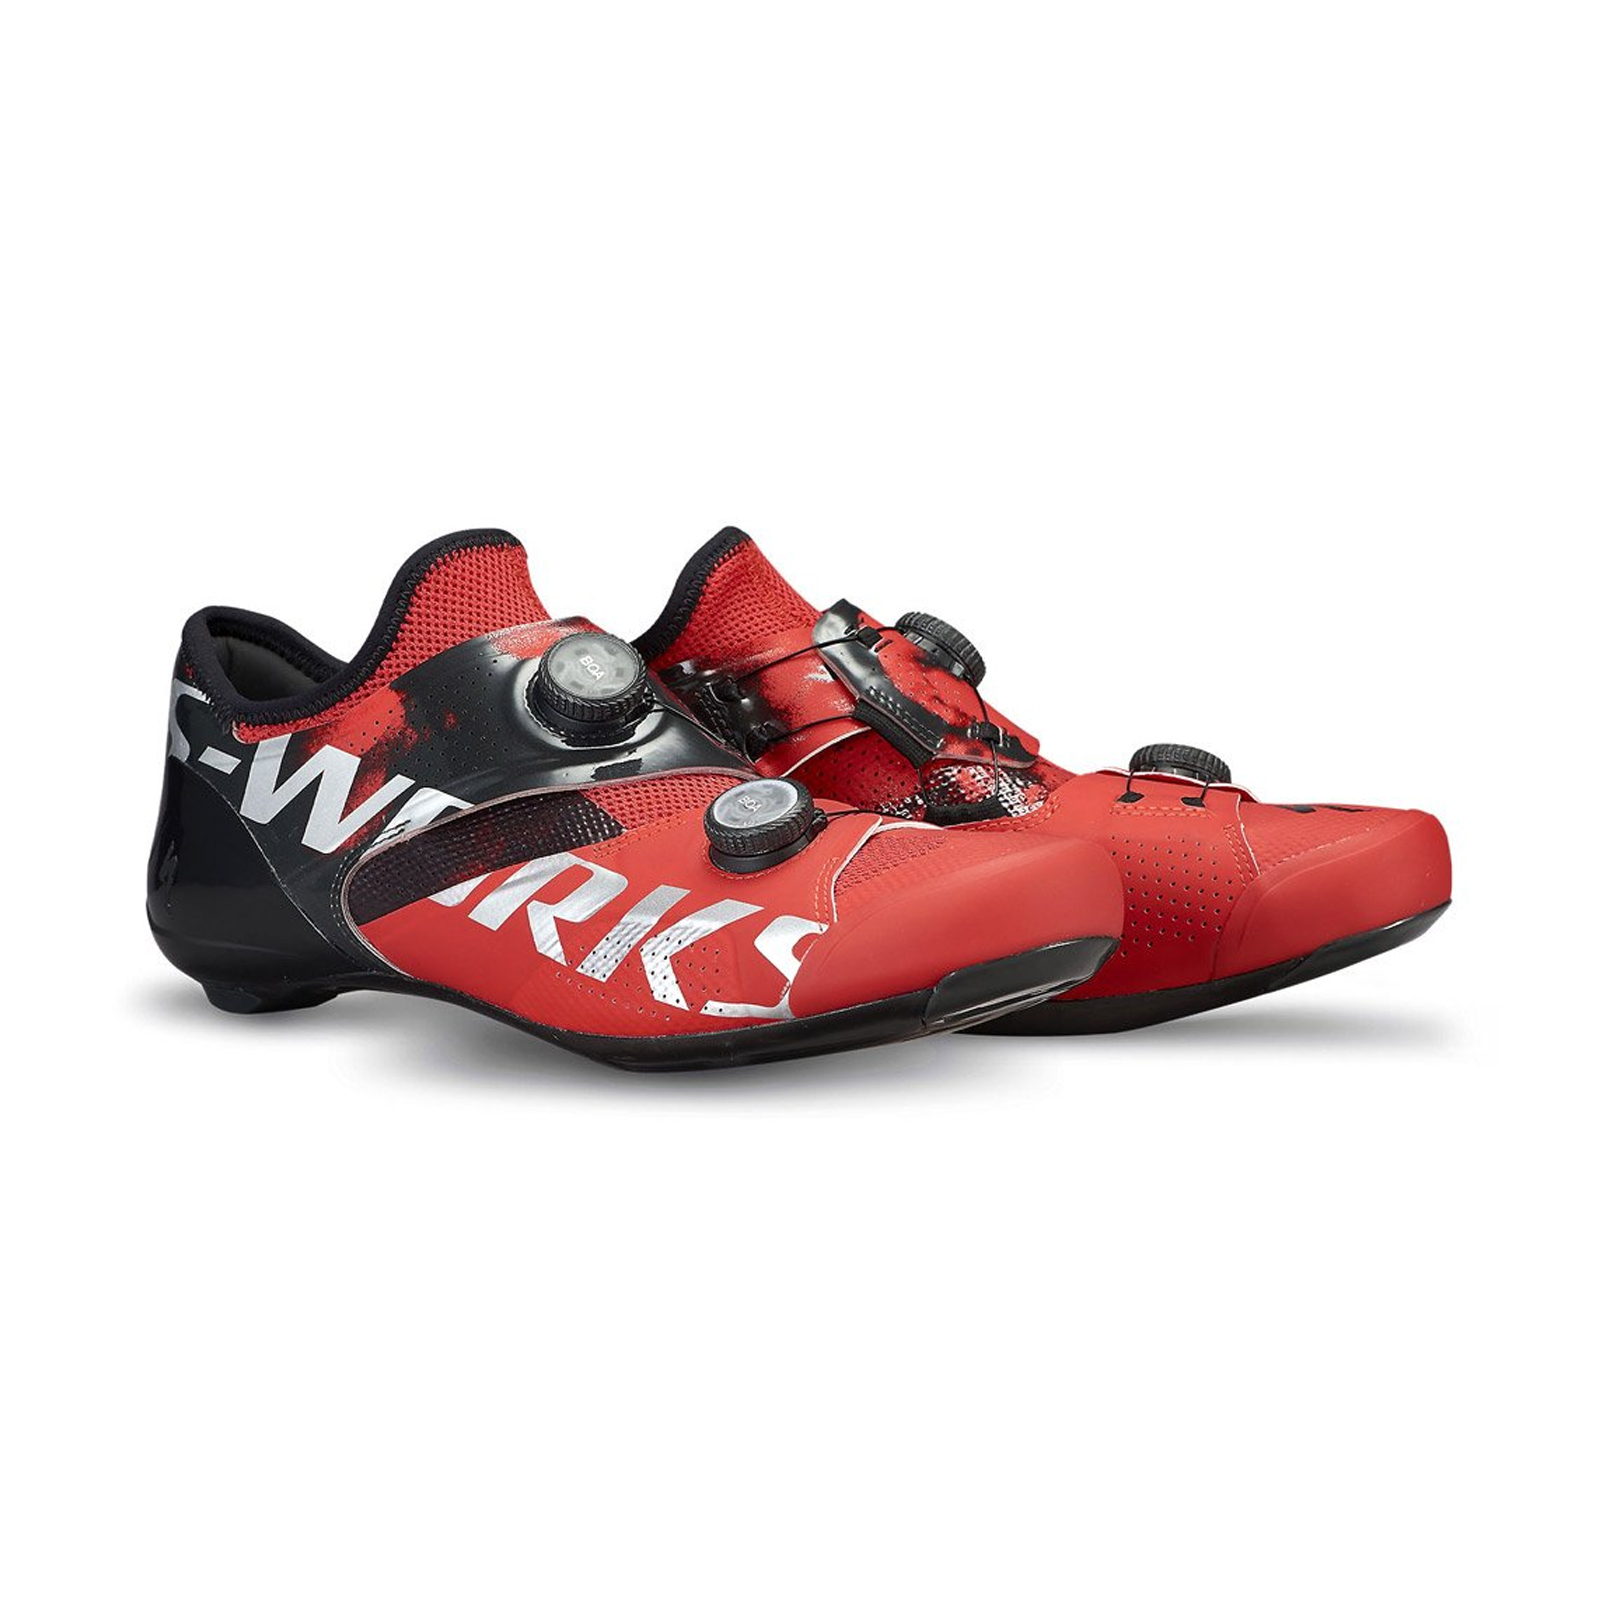 SW SPZ SW ARES RD ZAPATO RED